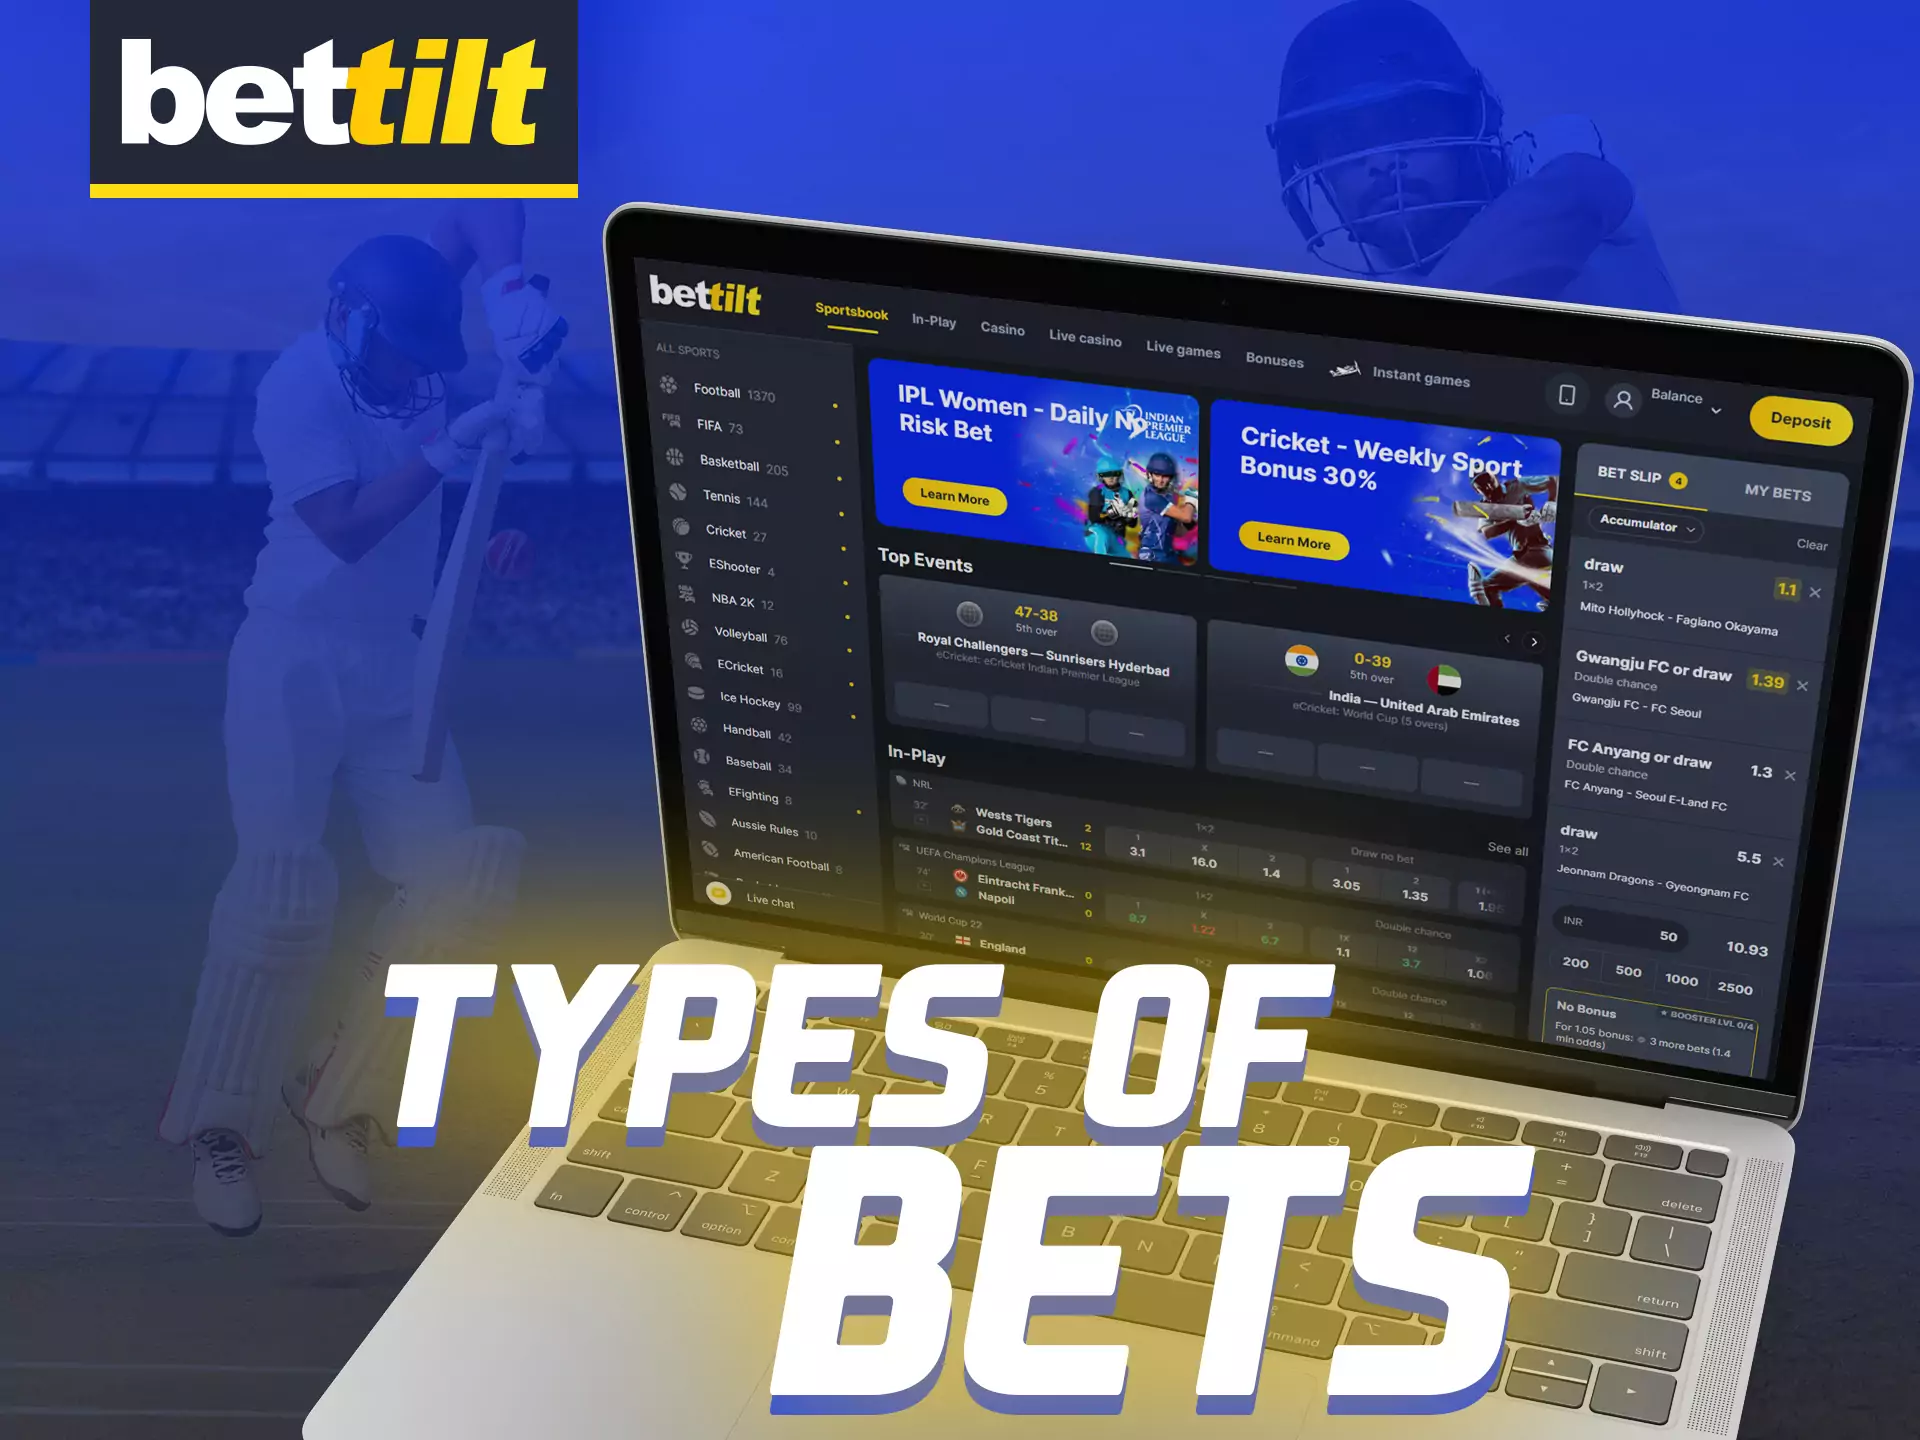 There are many convenient types of bets on Bettilt.